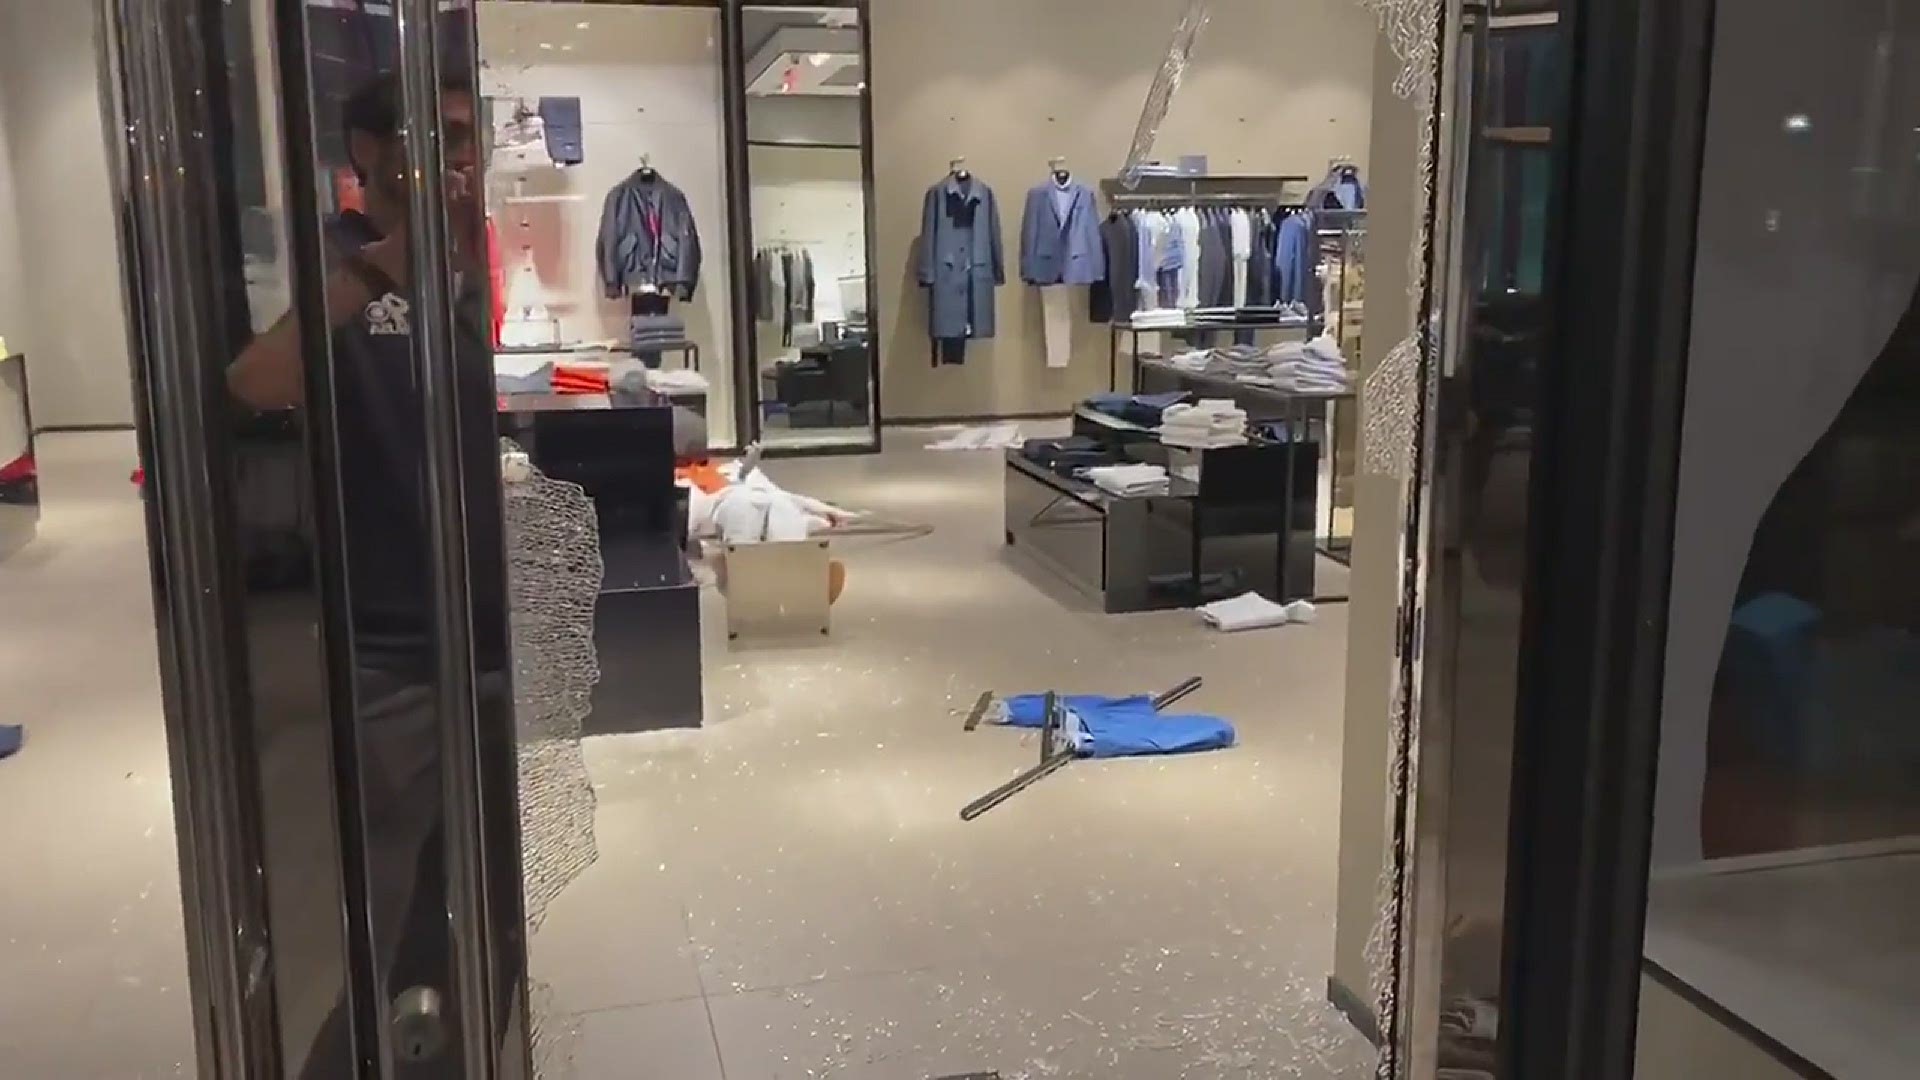 Dozens of retail stores in Georgetown and in CityCenter downtown experienced property damage and theft.